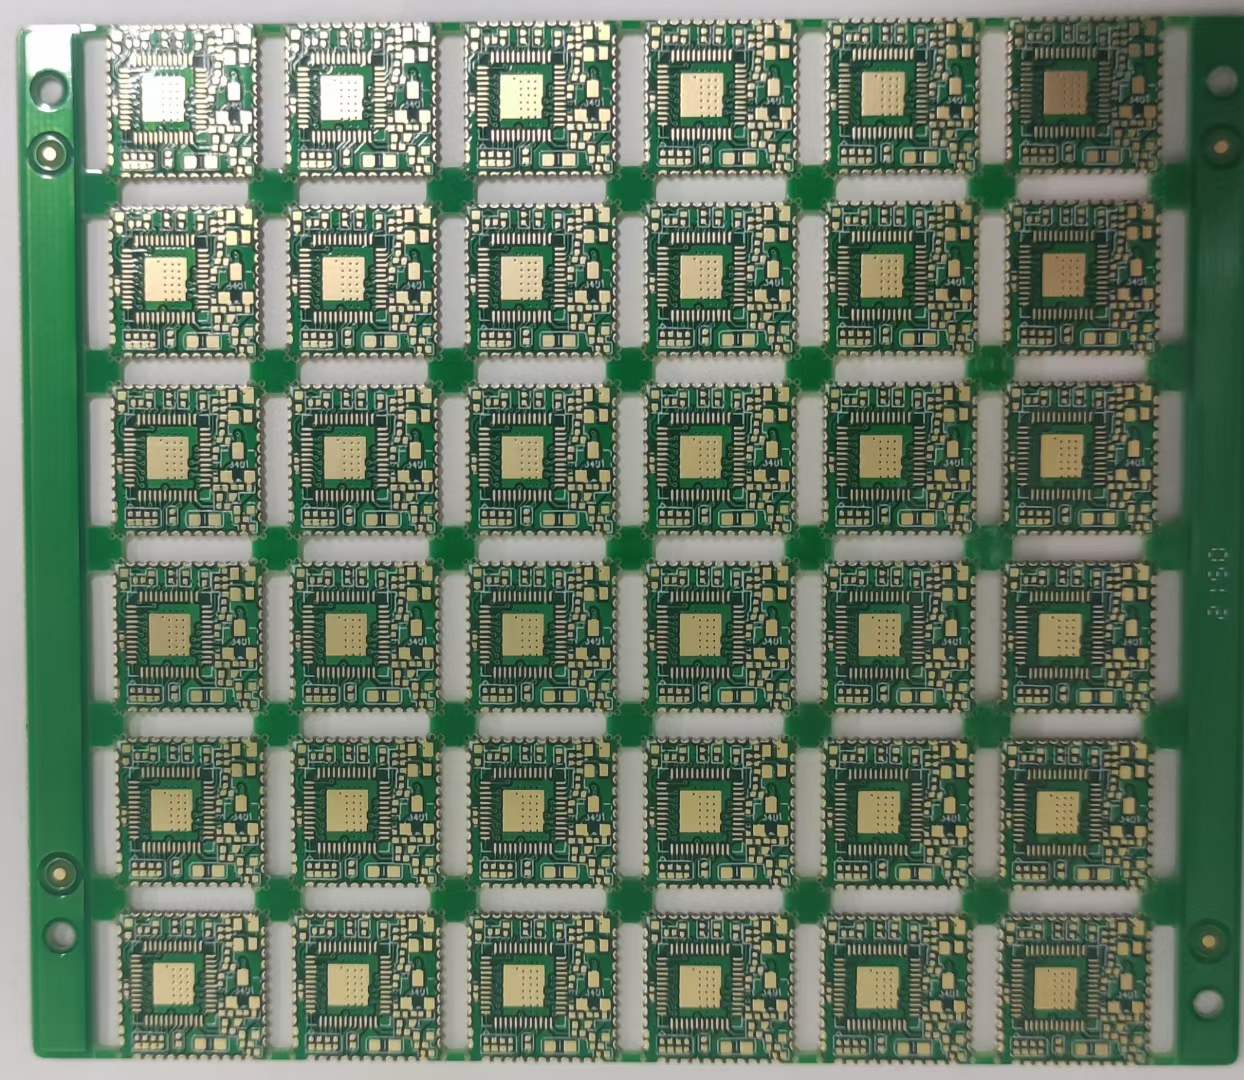 Why are PCBs layered